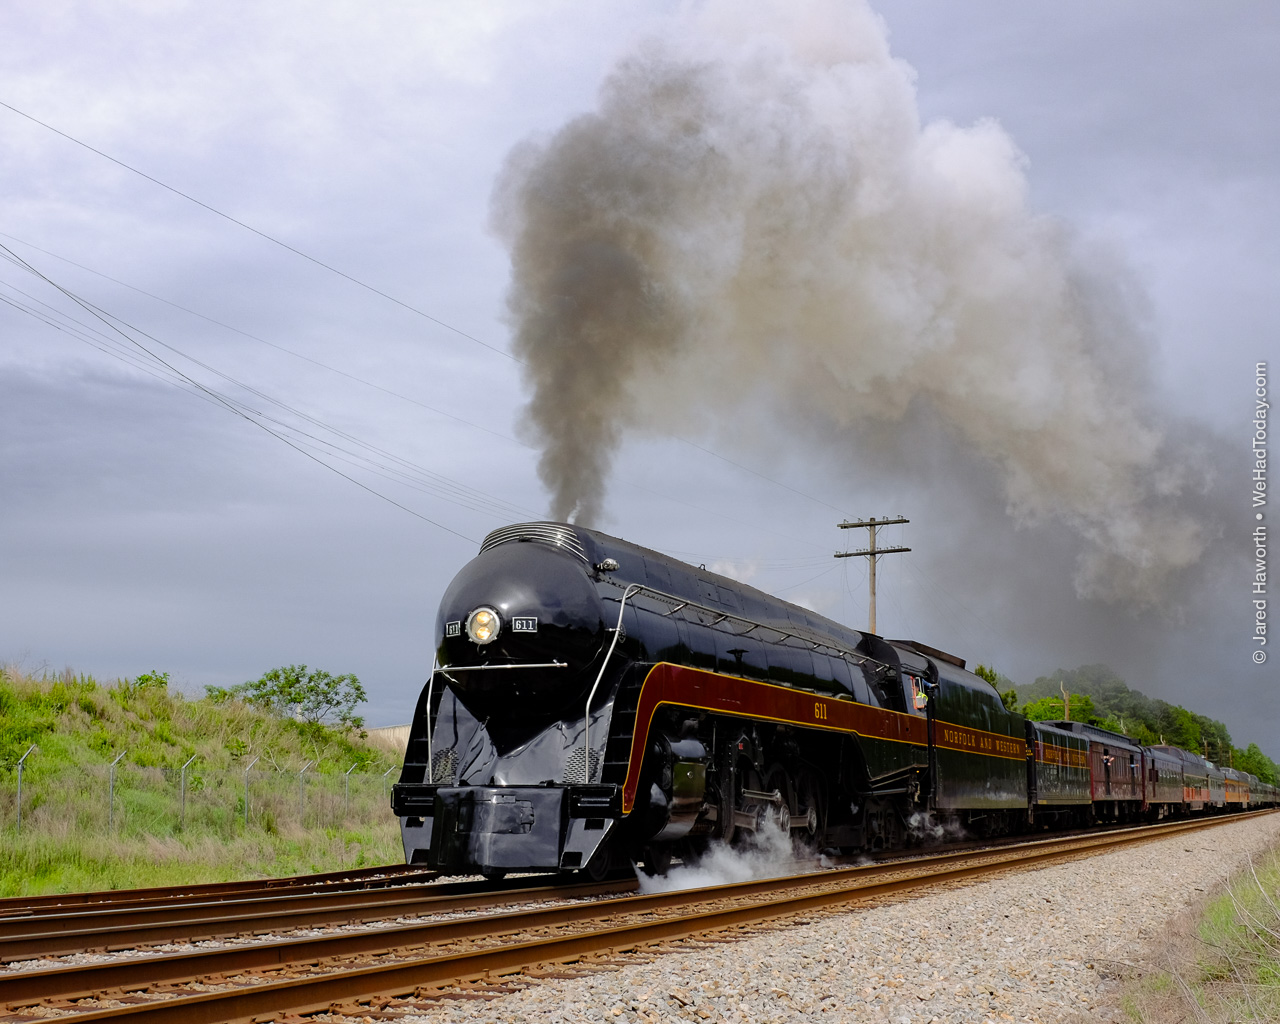 Leaving Petersburg Virginia and some rainy weather behind, the N&W 611 comes up to speed enroute to Lynchburg.